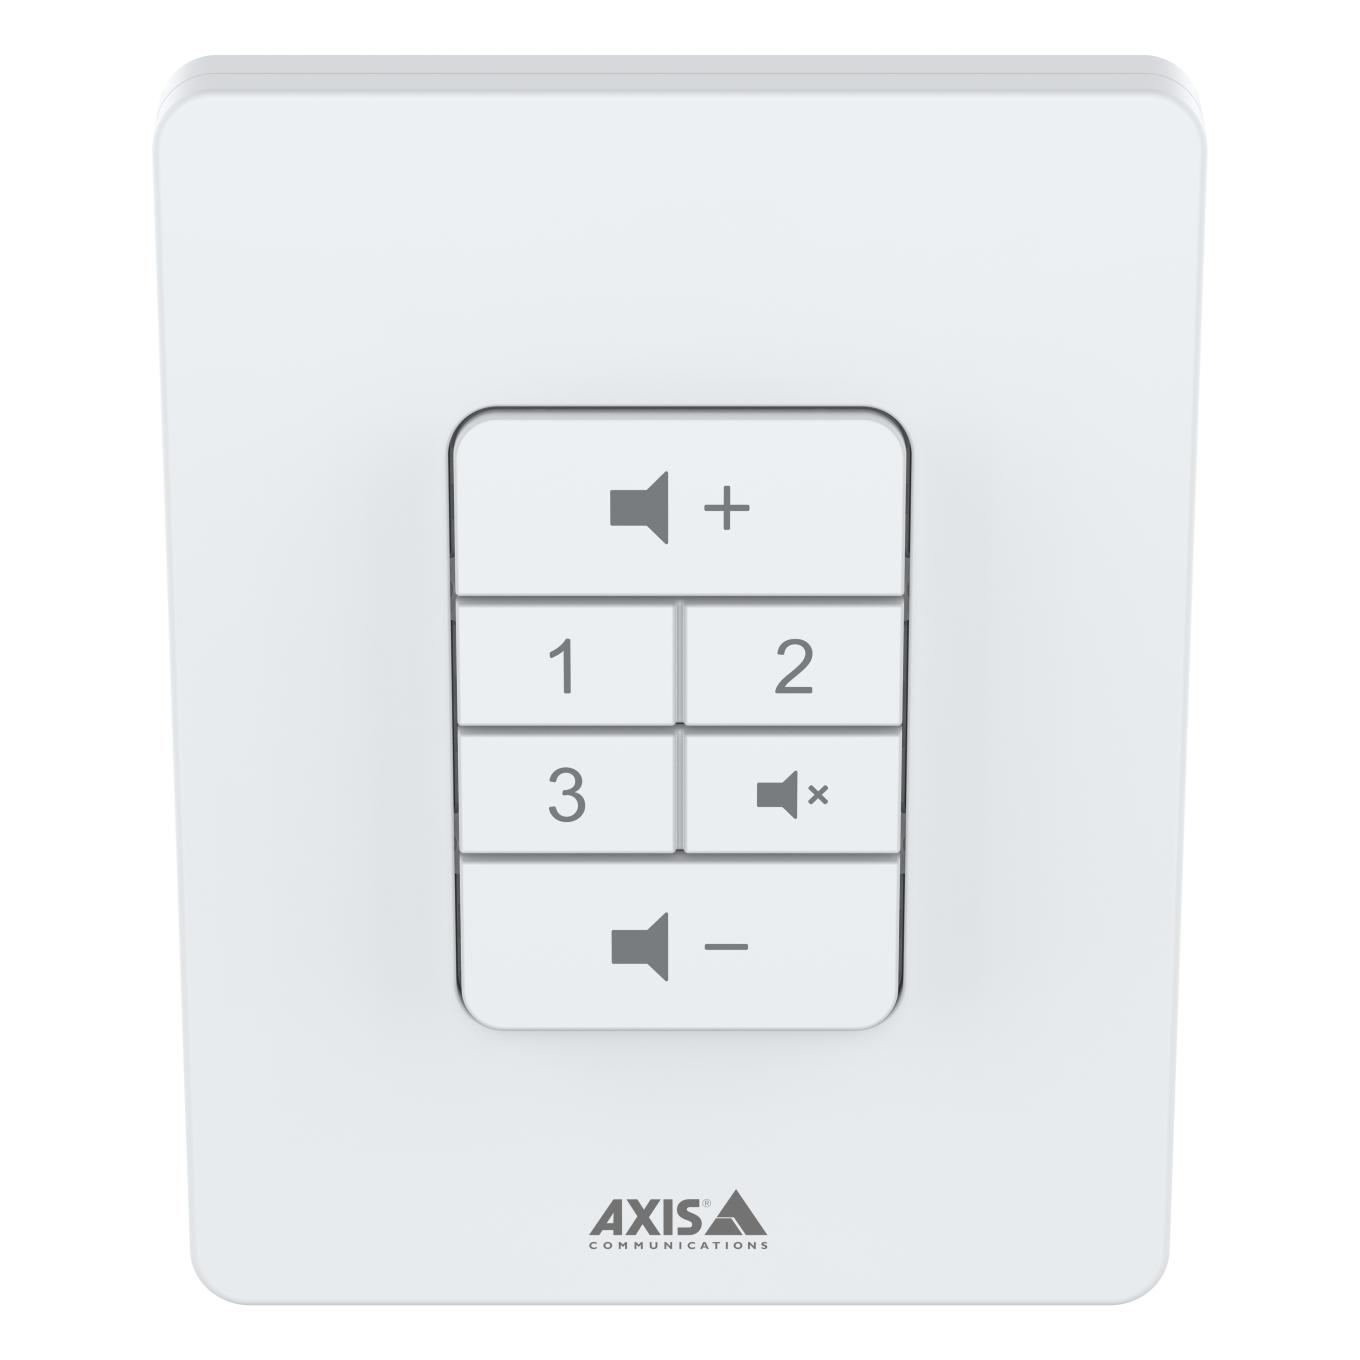 White volume controller for wall mount. C8310 is viewed from its front.